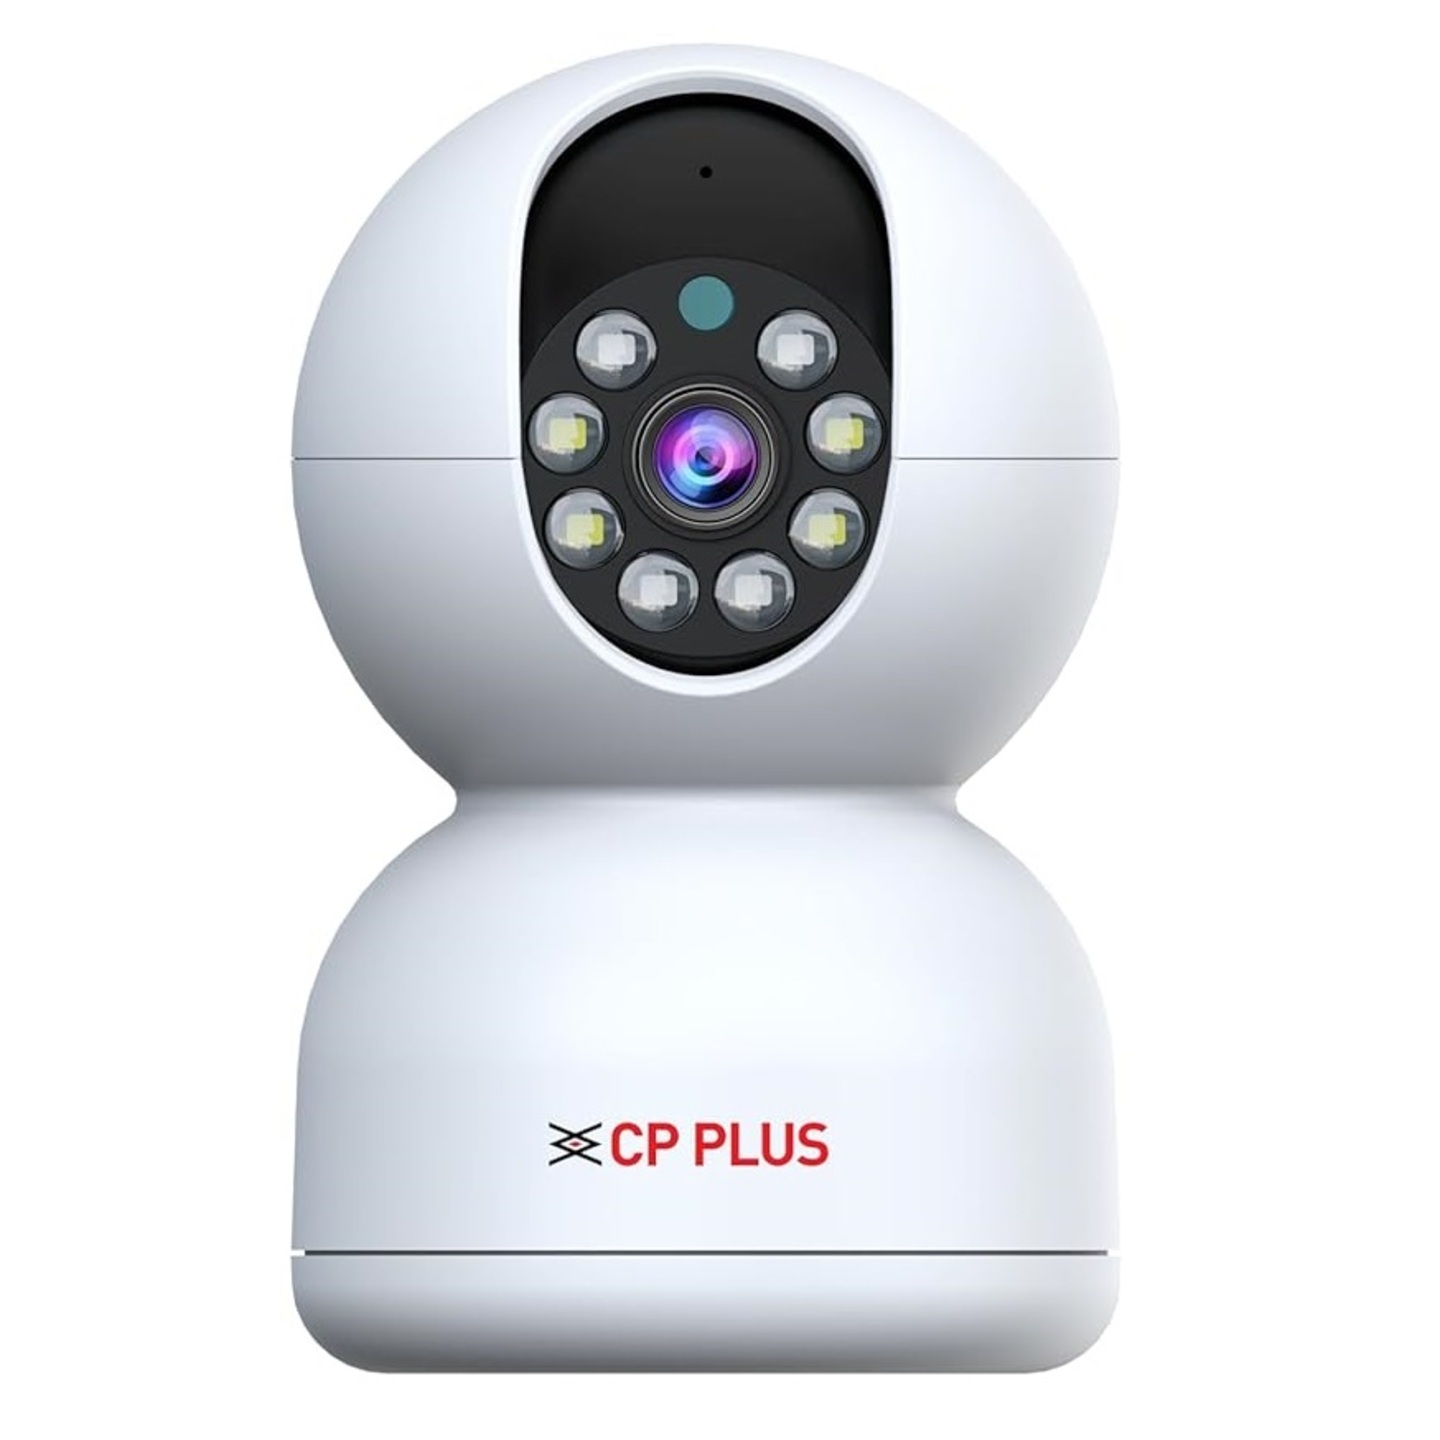 CP PLUS Full HD Smart Wi-fi CCTV Camera with 360 view, 2-way talk and motion tracking